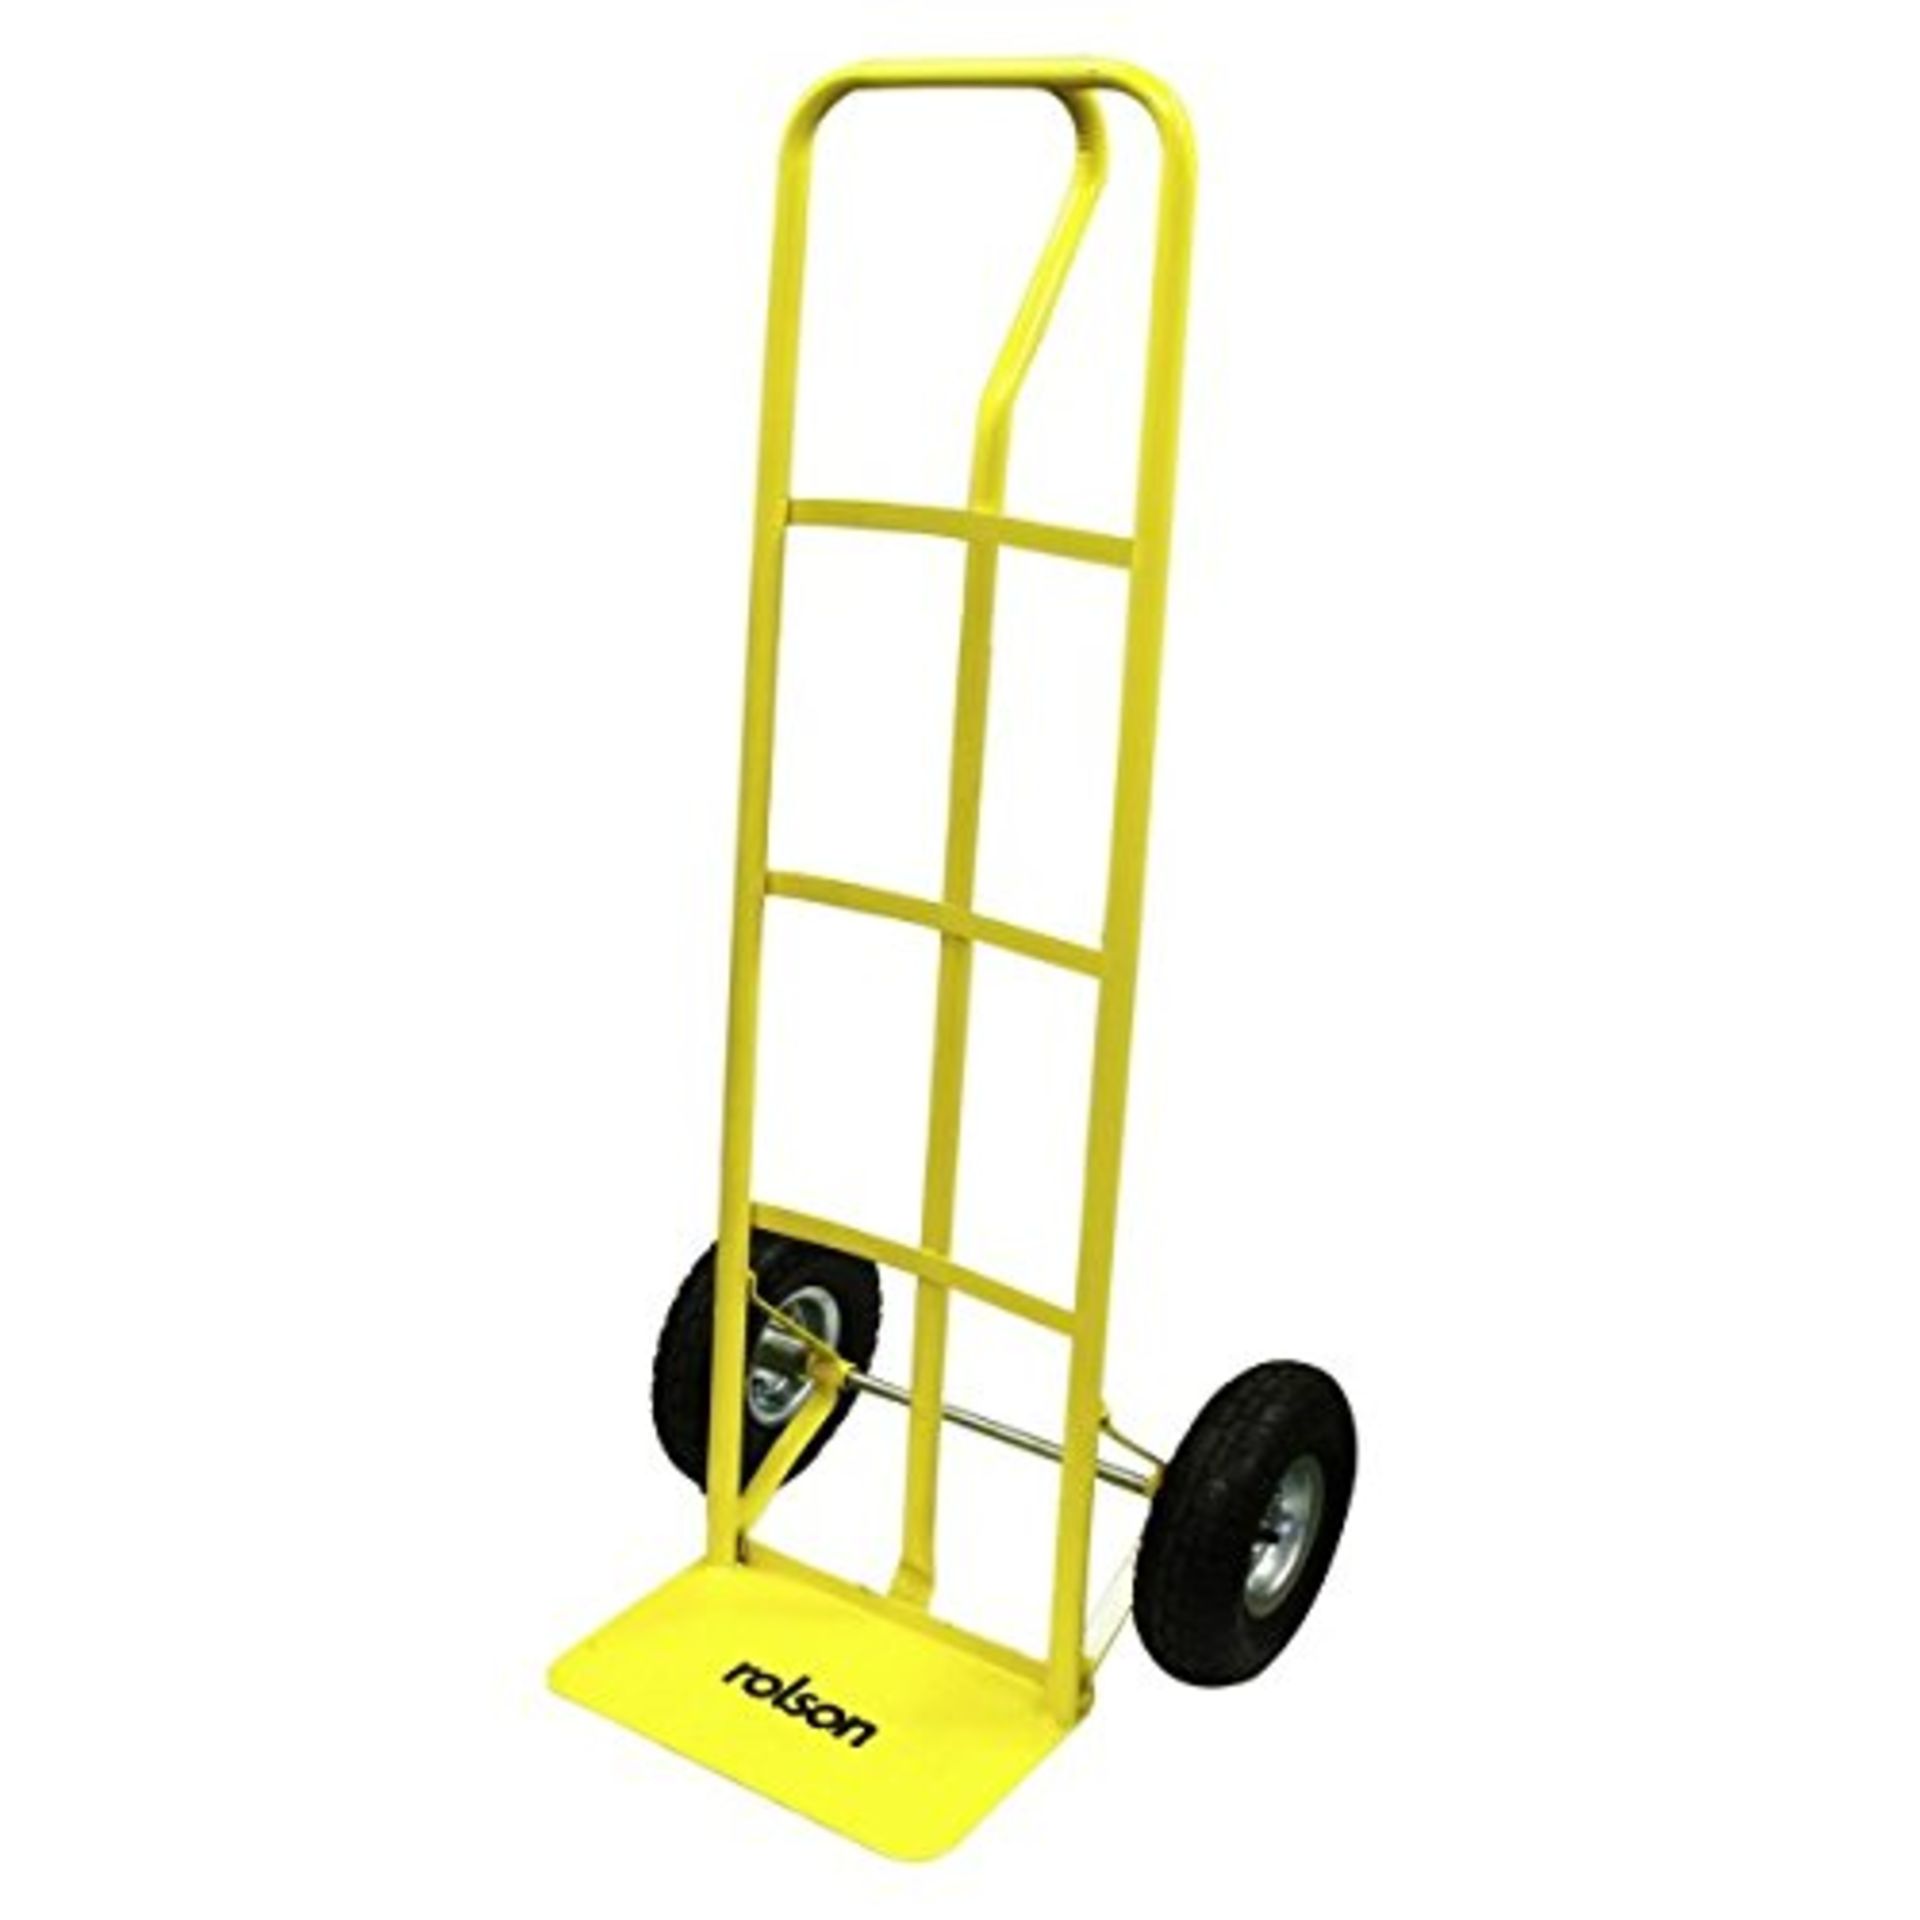 Rolson 42512 400 lb Hand Truck Capacity with 10-inch Wheel